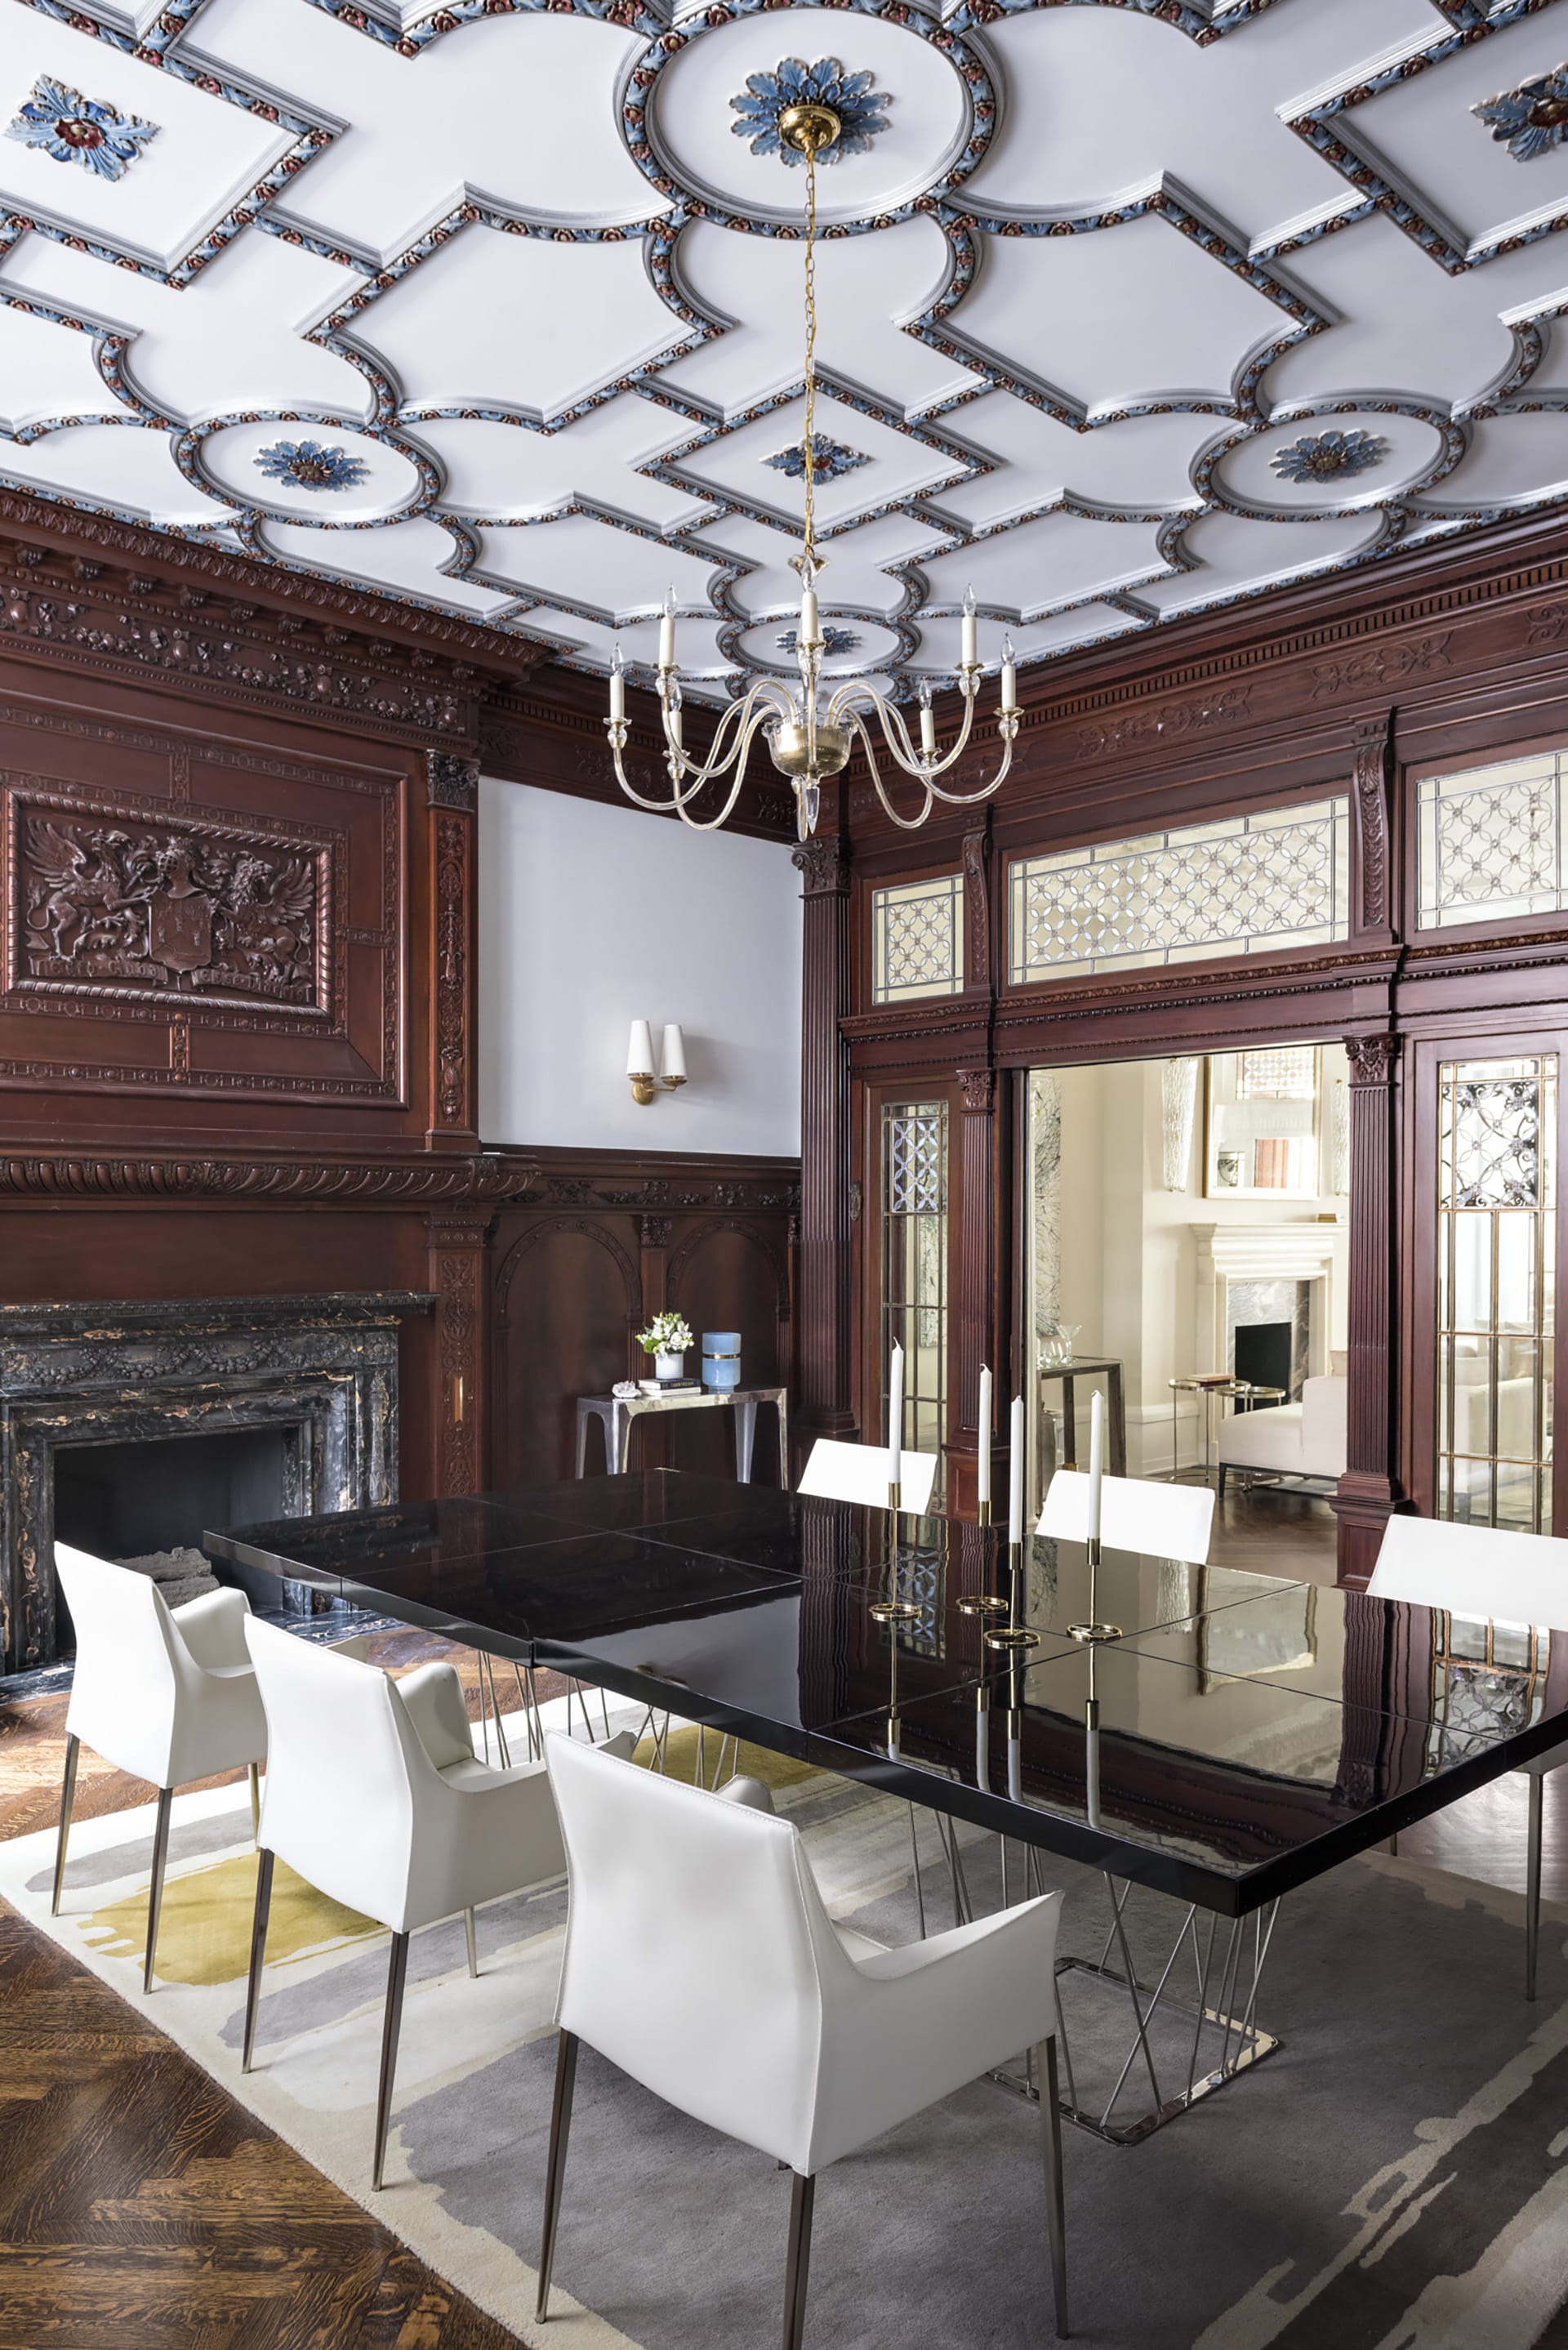 Dining room with contemporary furnishings, restored historic windows and ceiling details, and carved wood paneling.